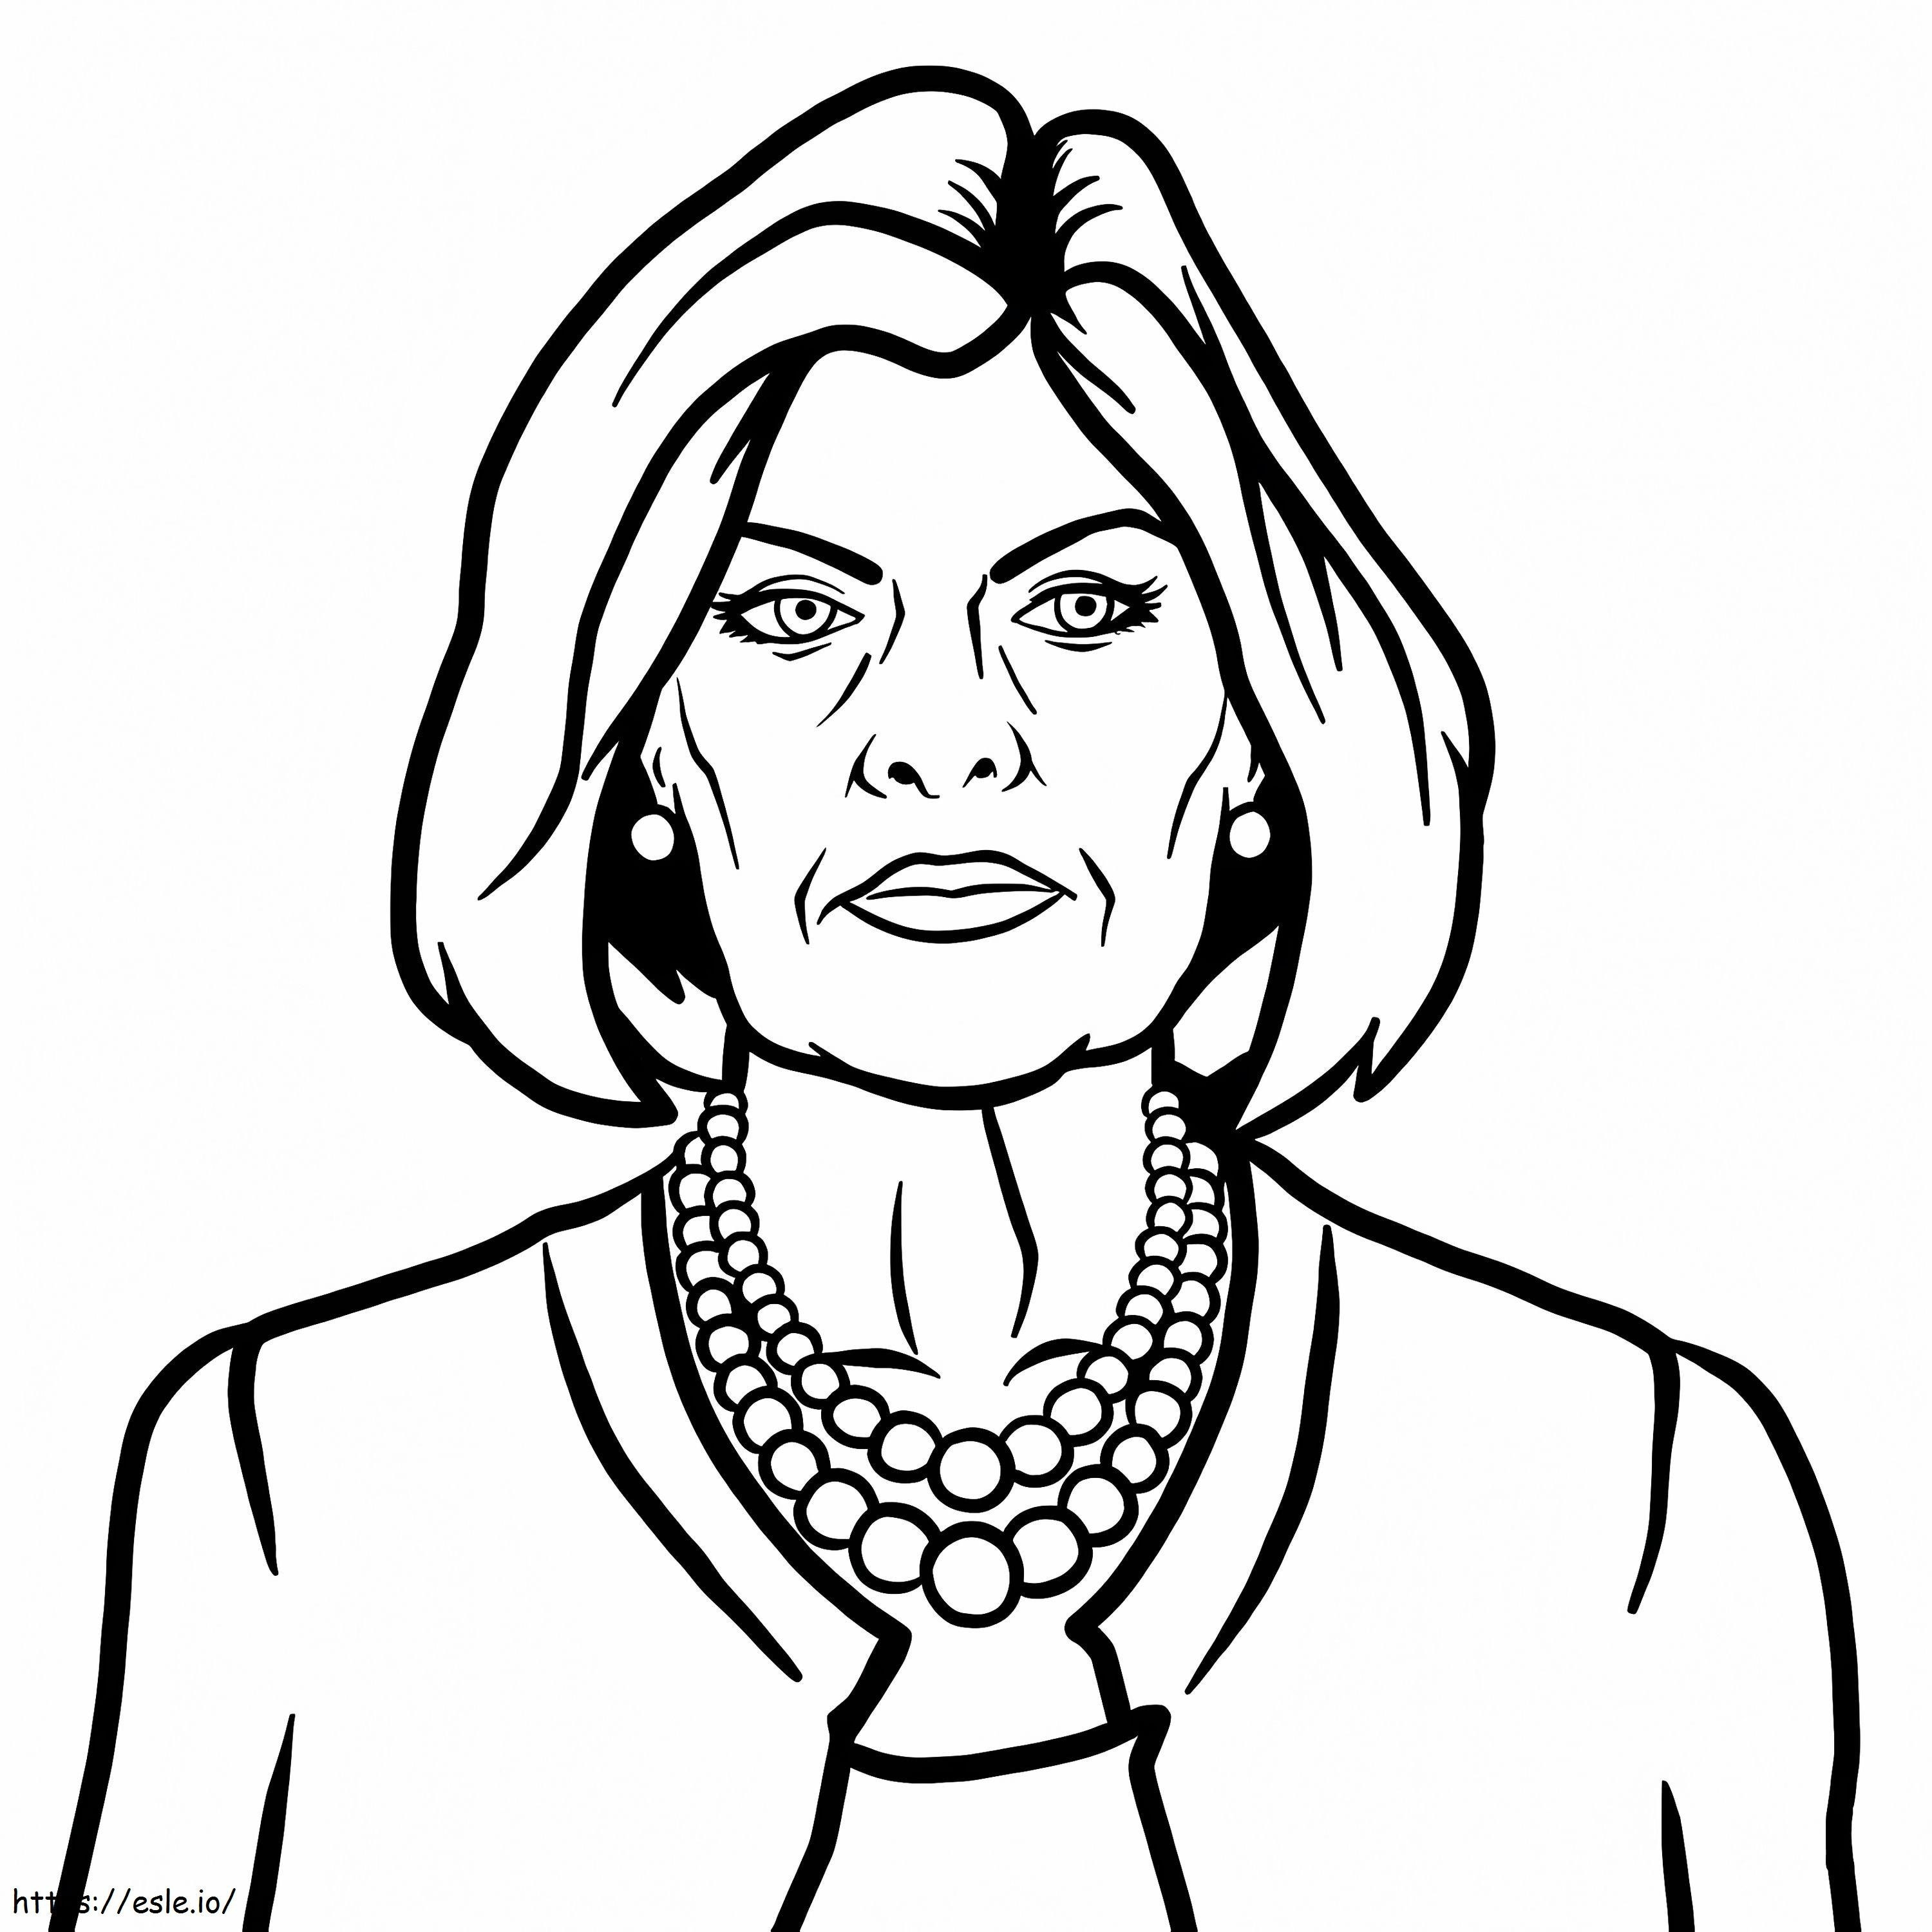 Malory Archer From Sterling Archer coloring page